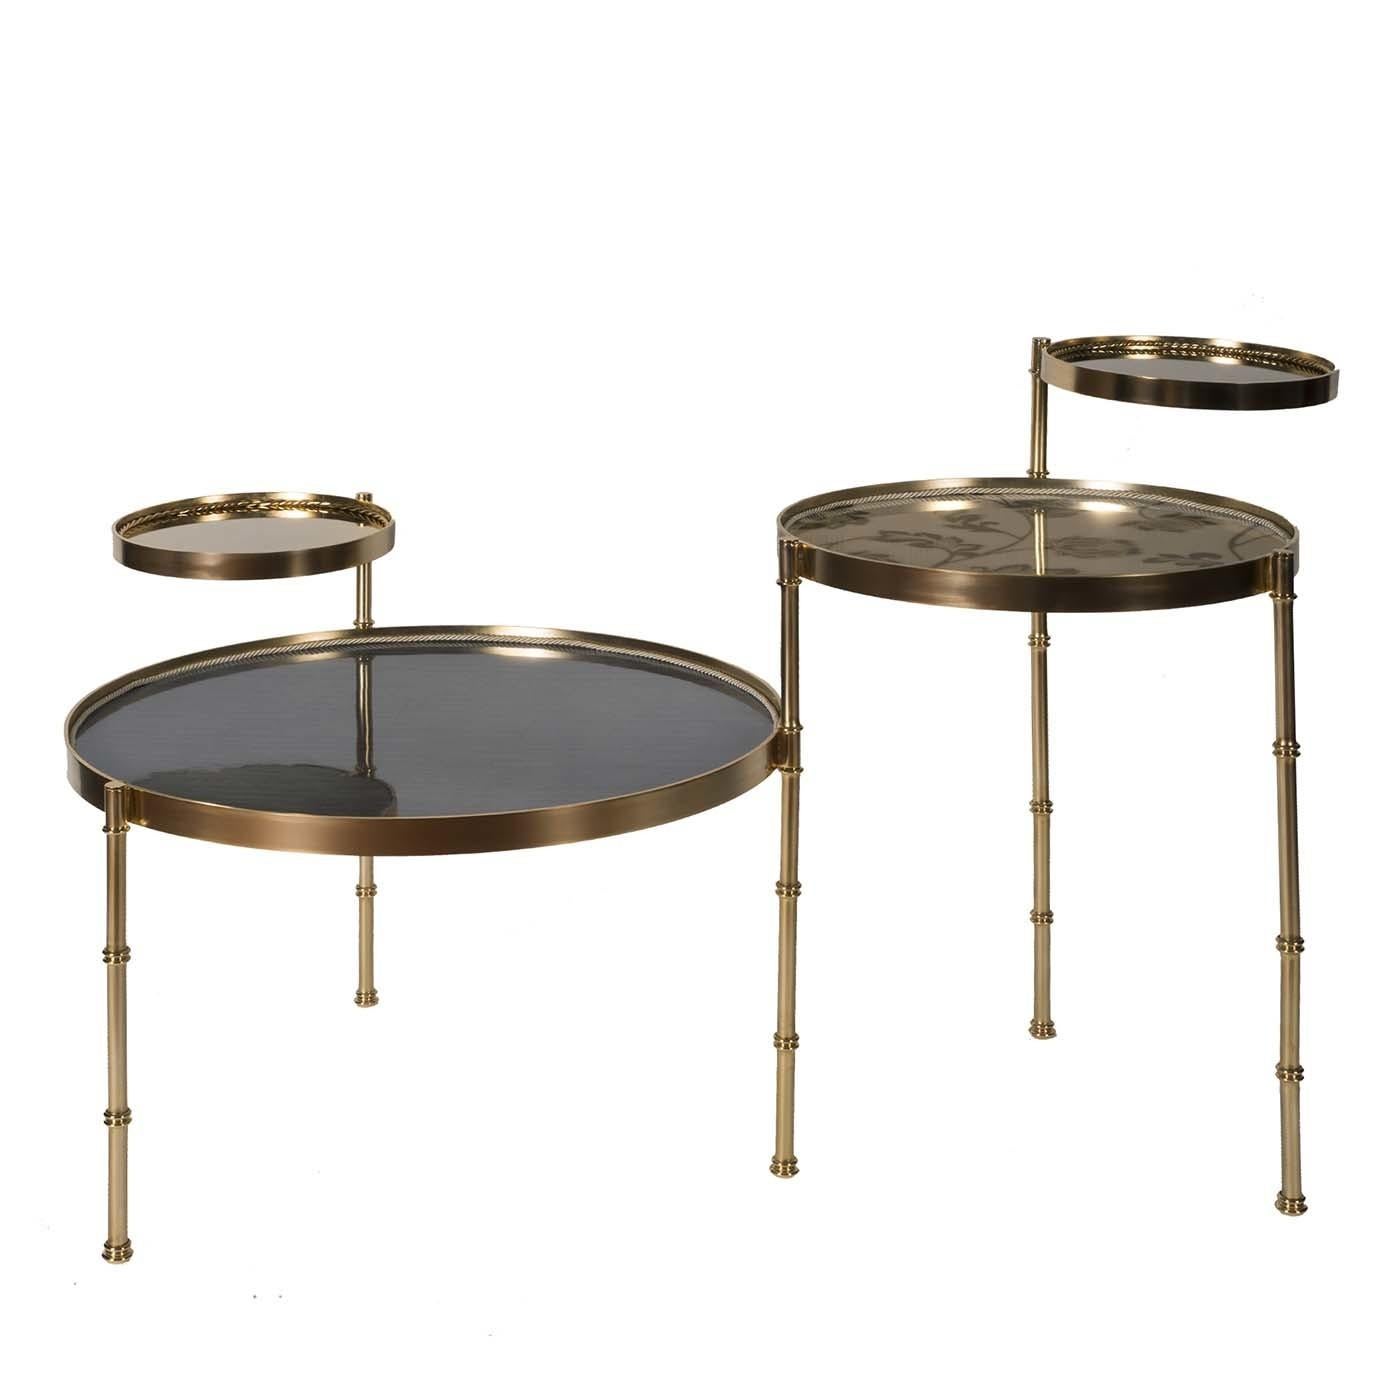 Exuding sleek allure, this coffee table will infuse bold character into any Minimalist decor. Its intricate silhouette is characterized by an interplay of shapes that reveals a cohesive design: crafted of brass with a satin gold finish, the table is